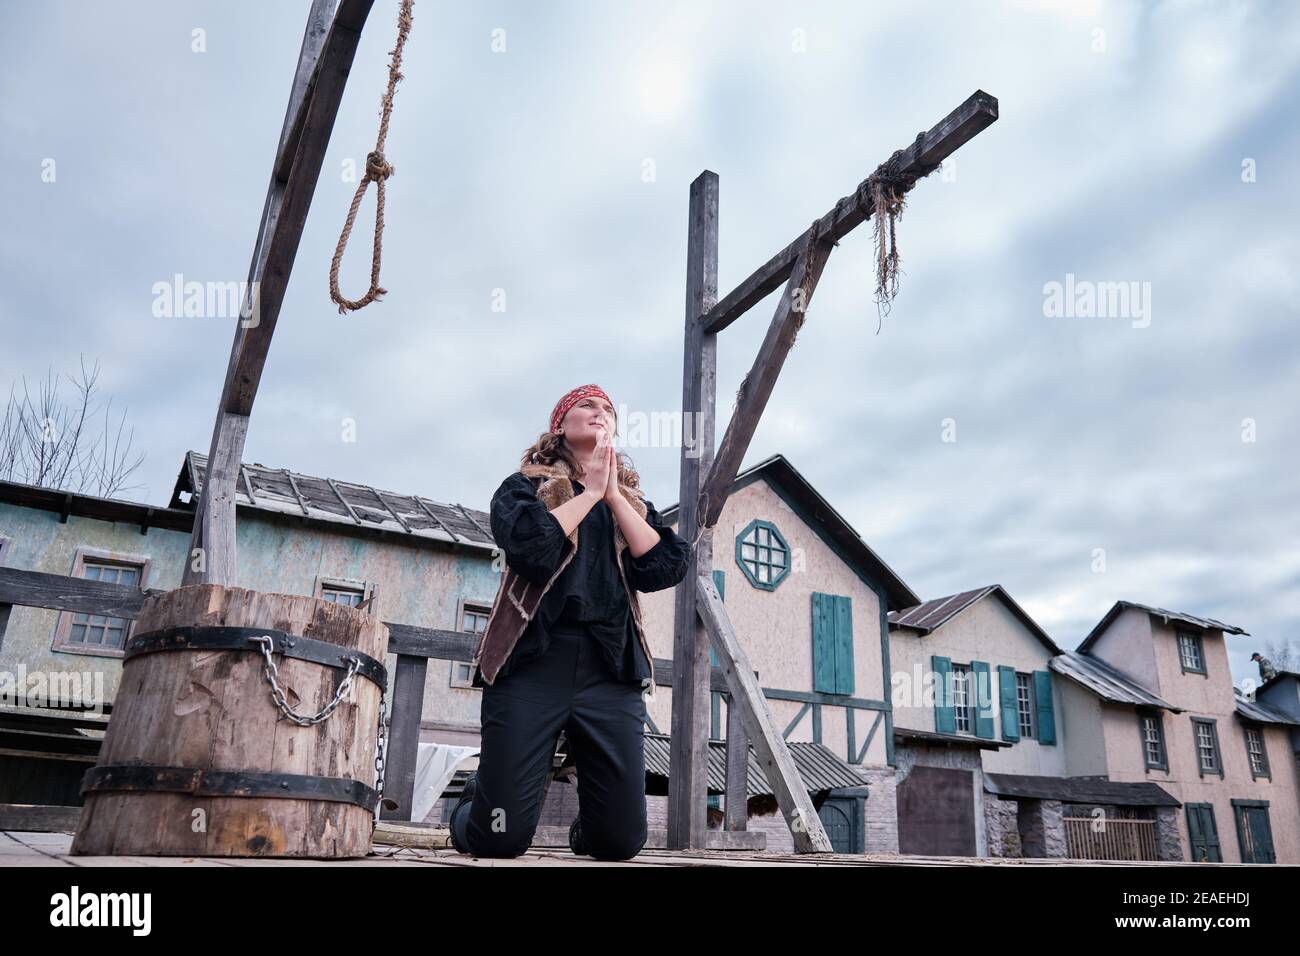 A young woman in black clothes is praying next to the gallows on her knees Stock Photo